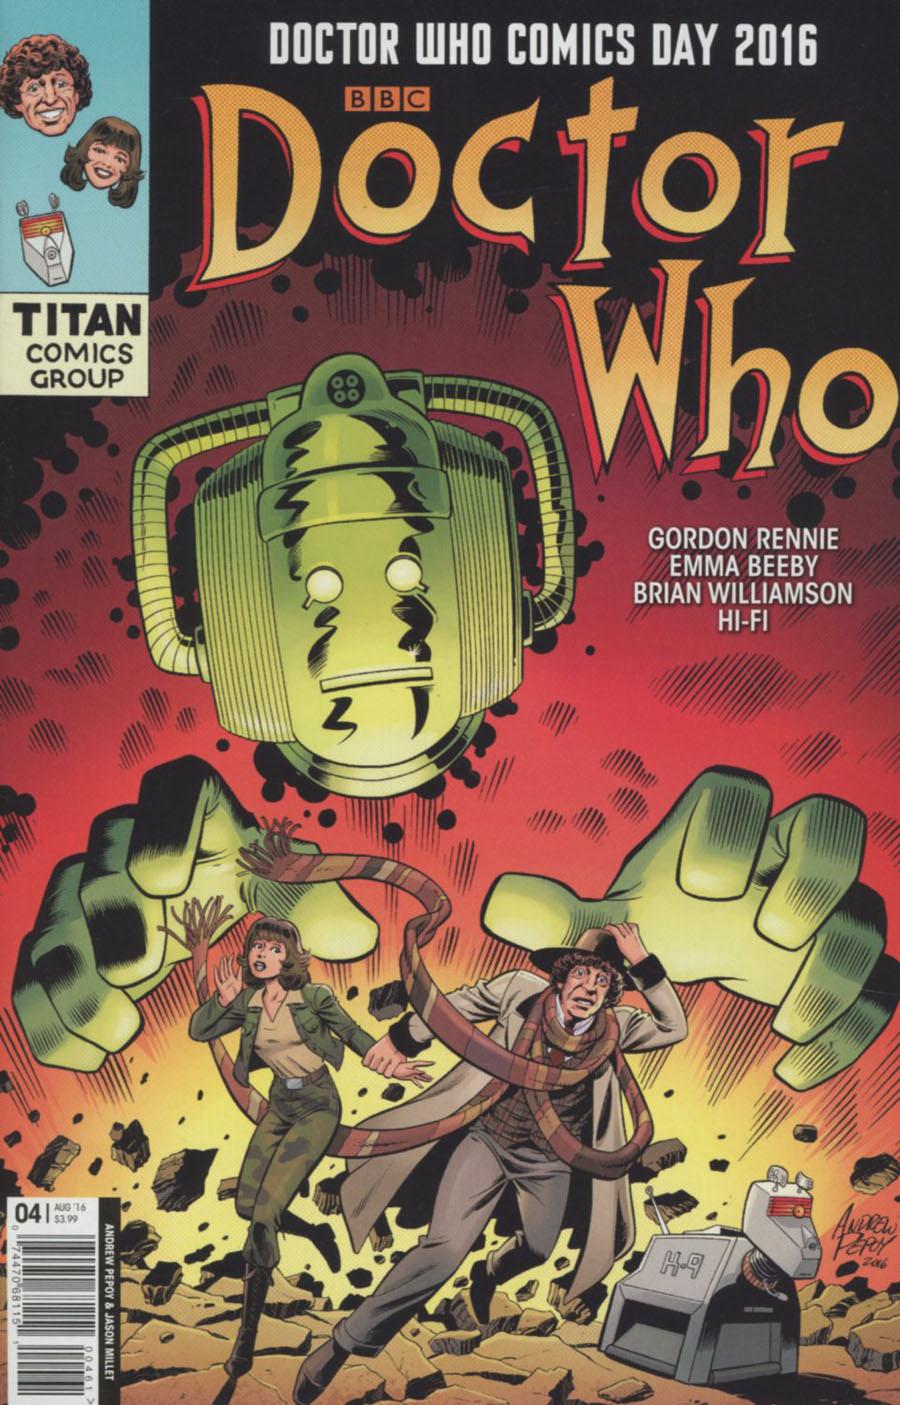 Doctor Who 4th Doctor Vol. 1 #5